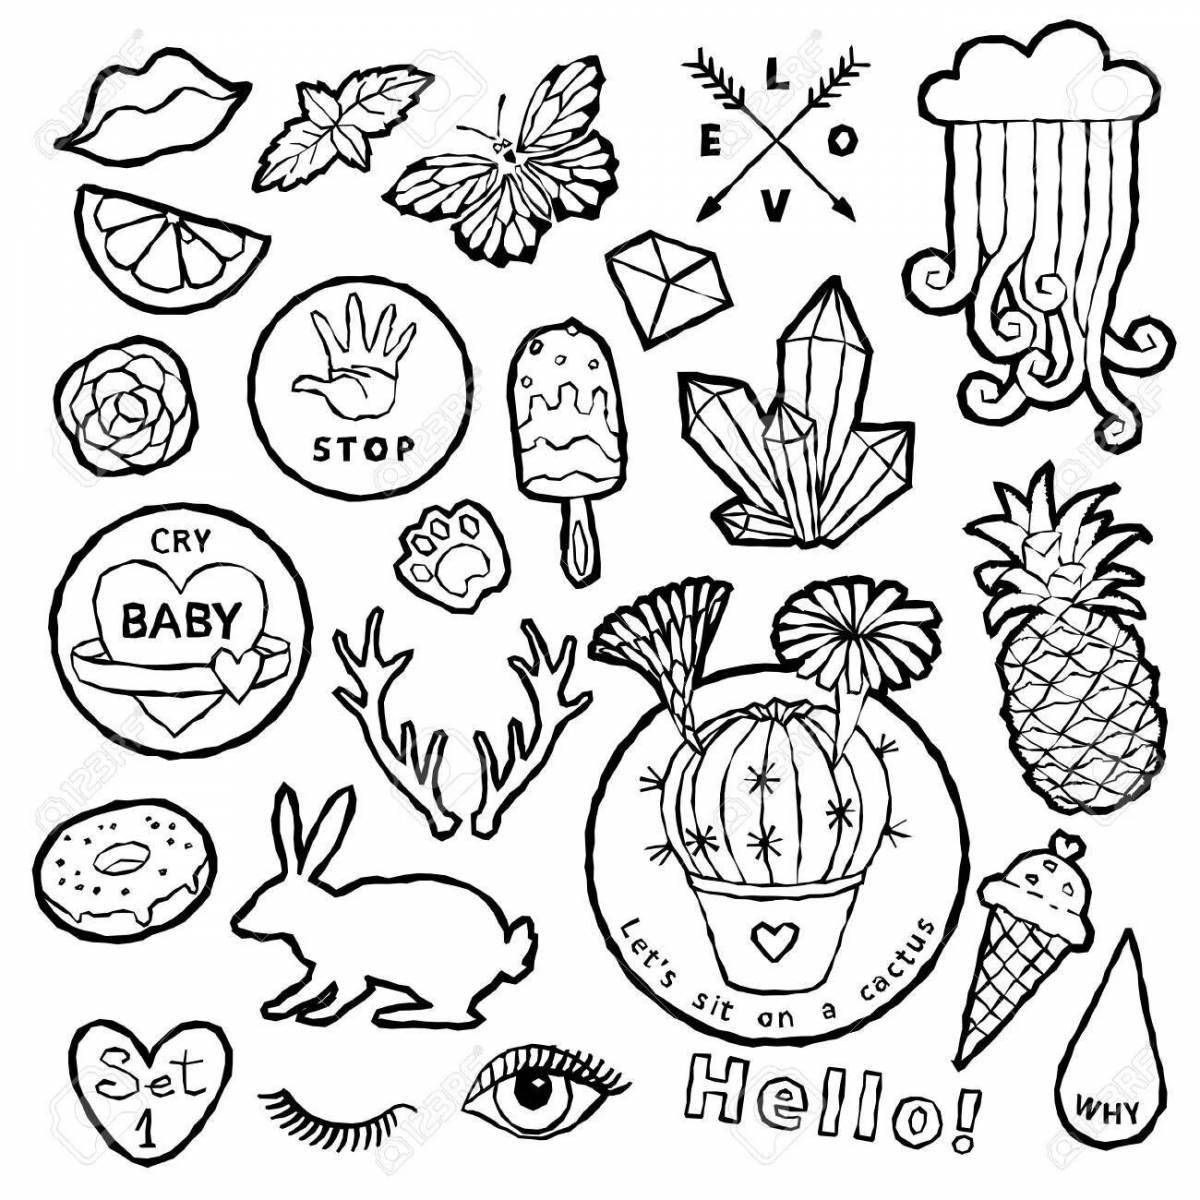 Playful DIY sticker coloring page